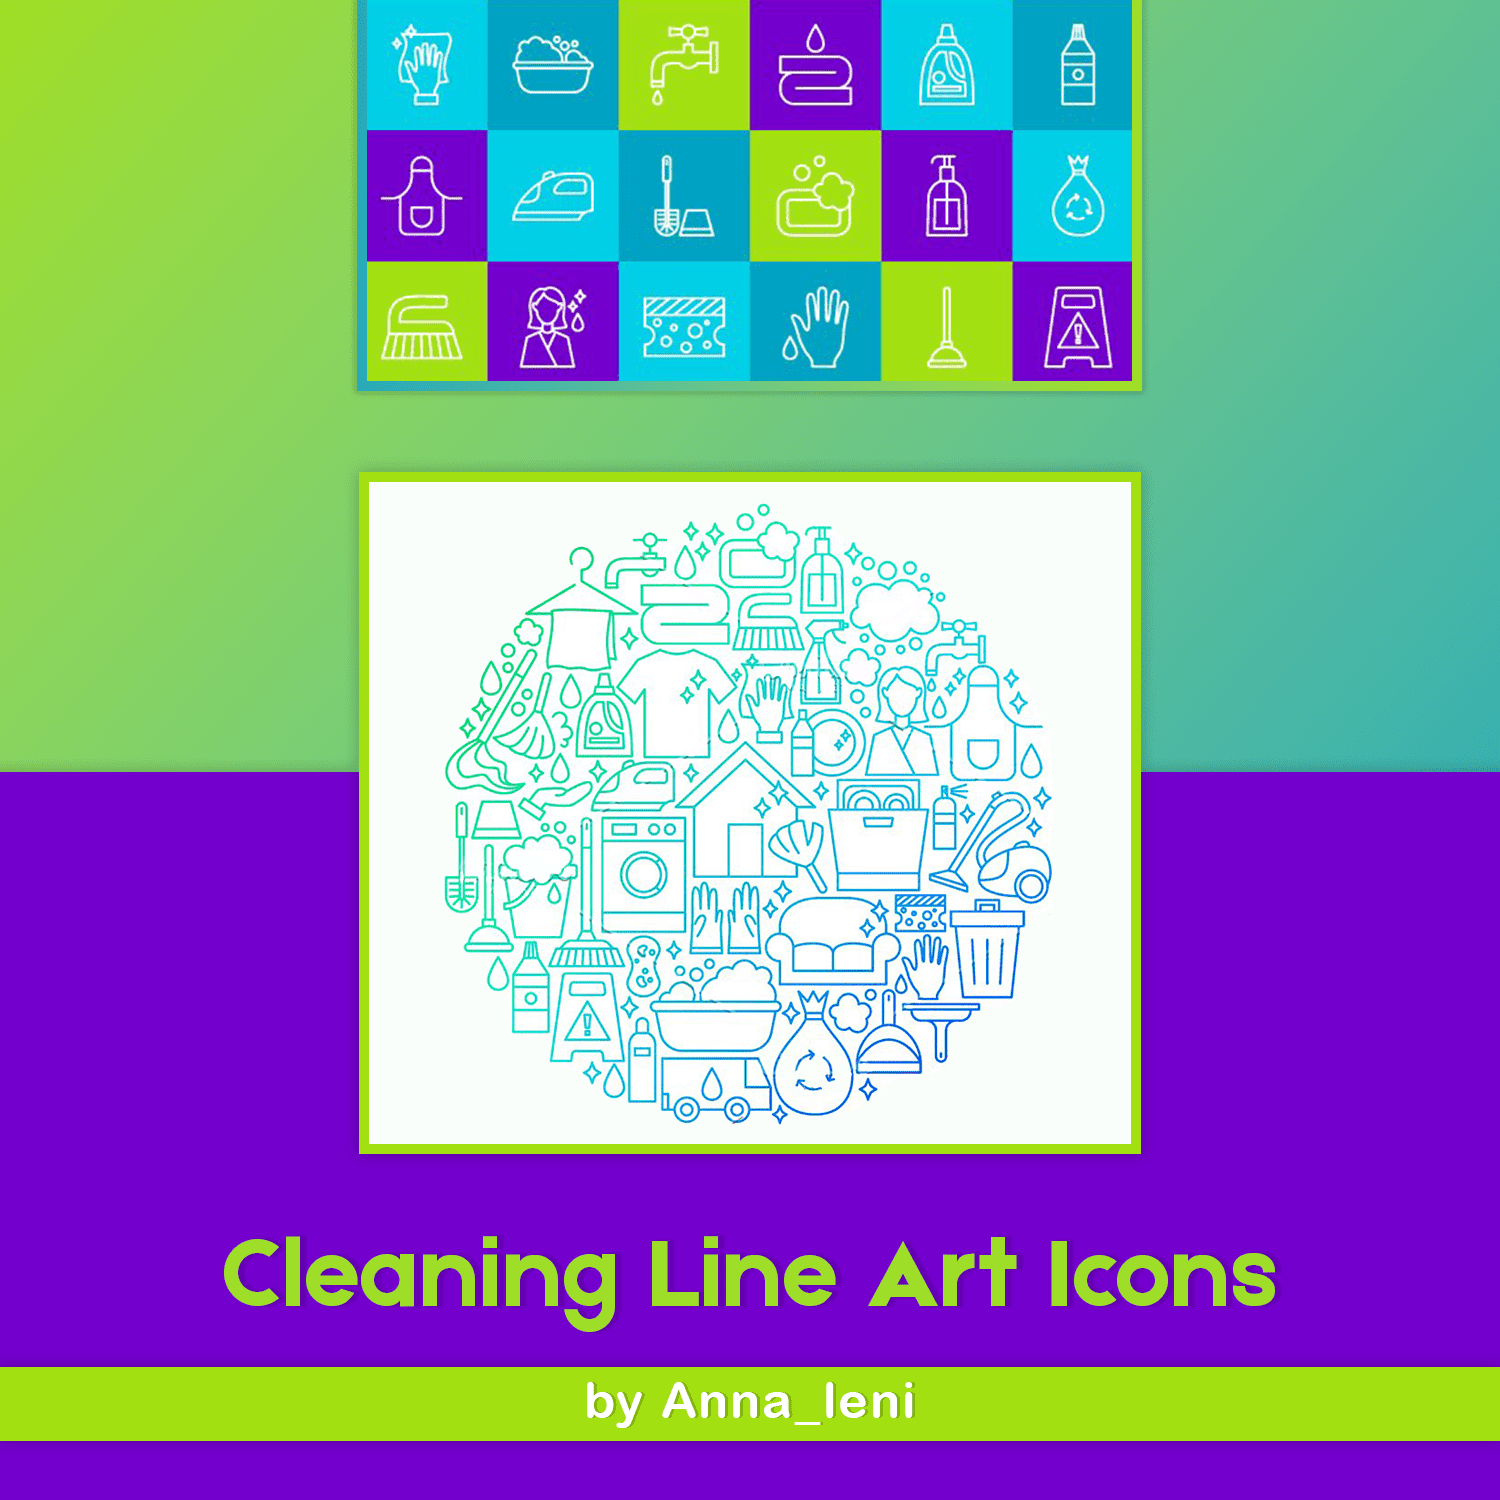 Cleaning Line Art Icons cover.